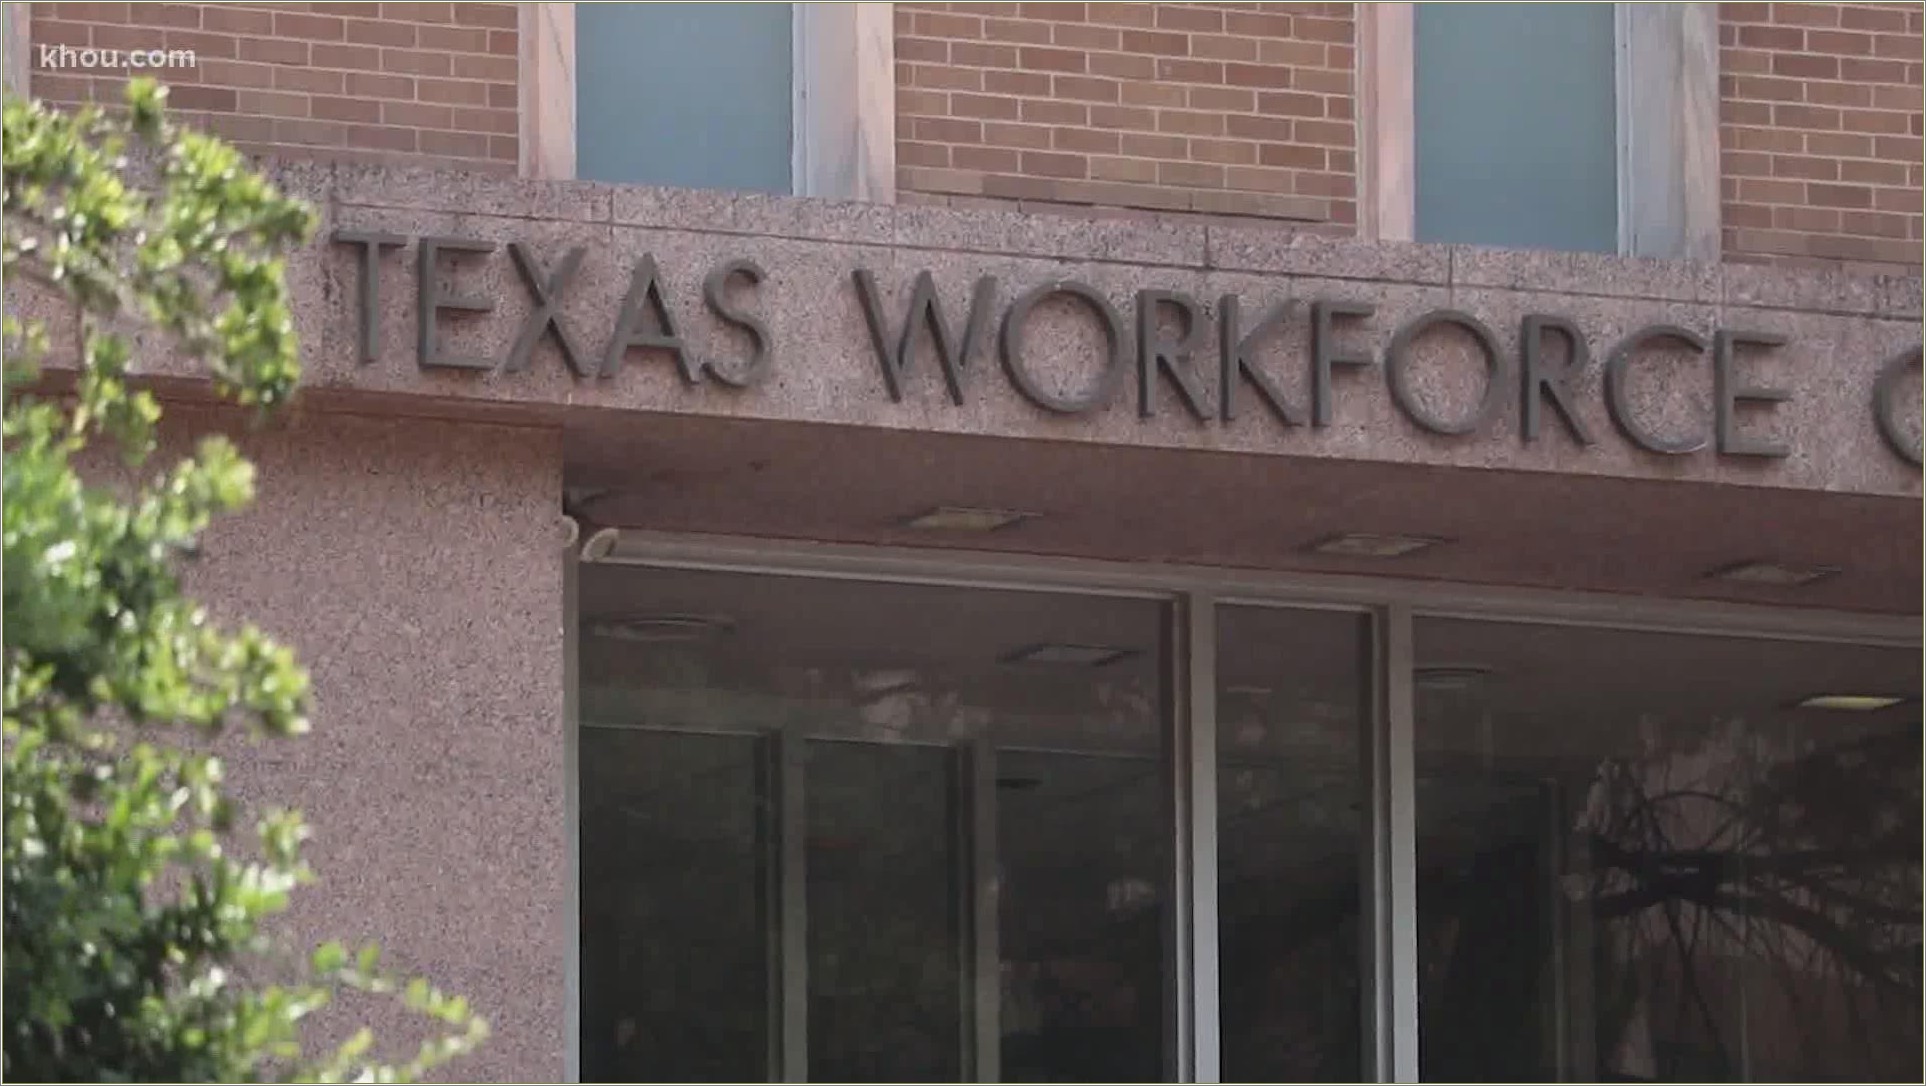 Work In Texas Site Will Resume